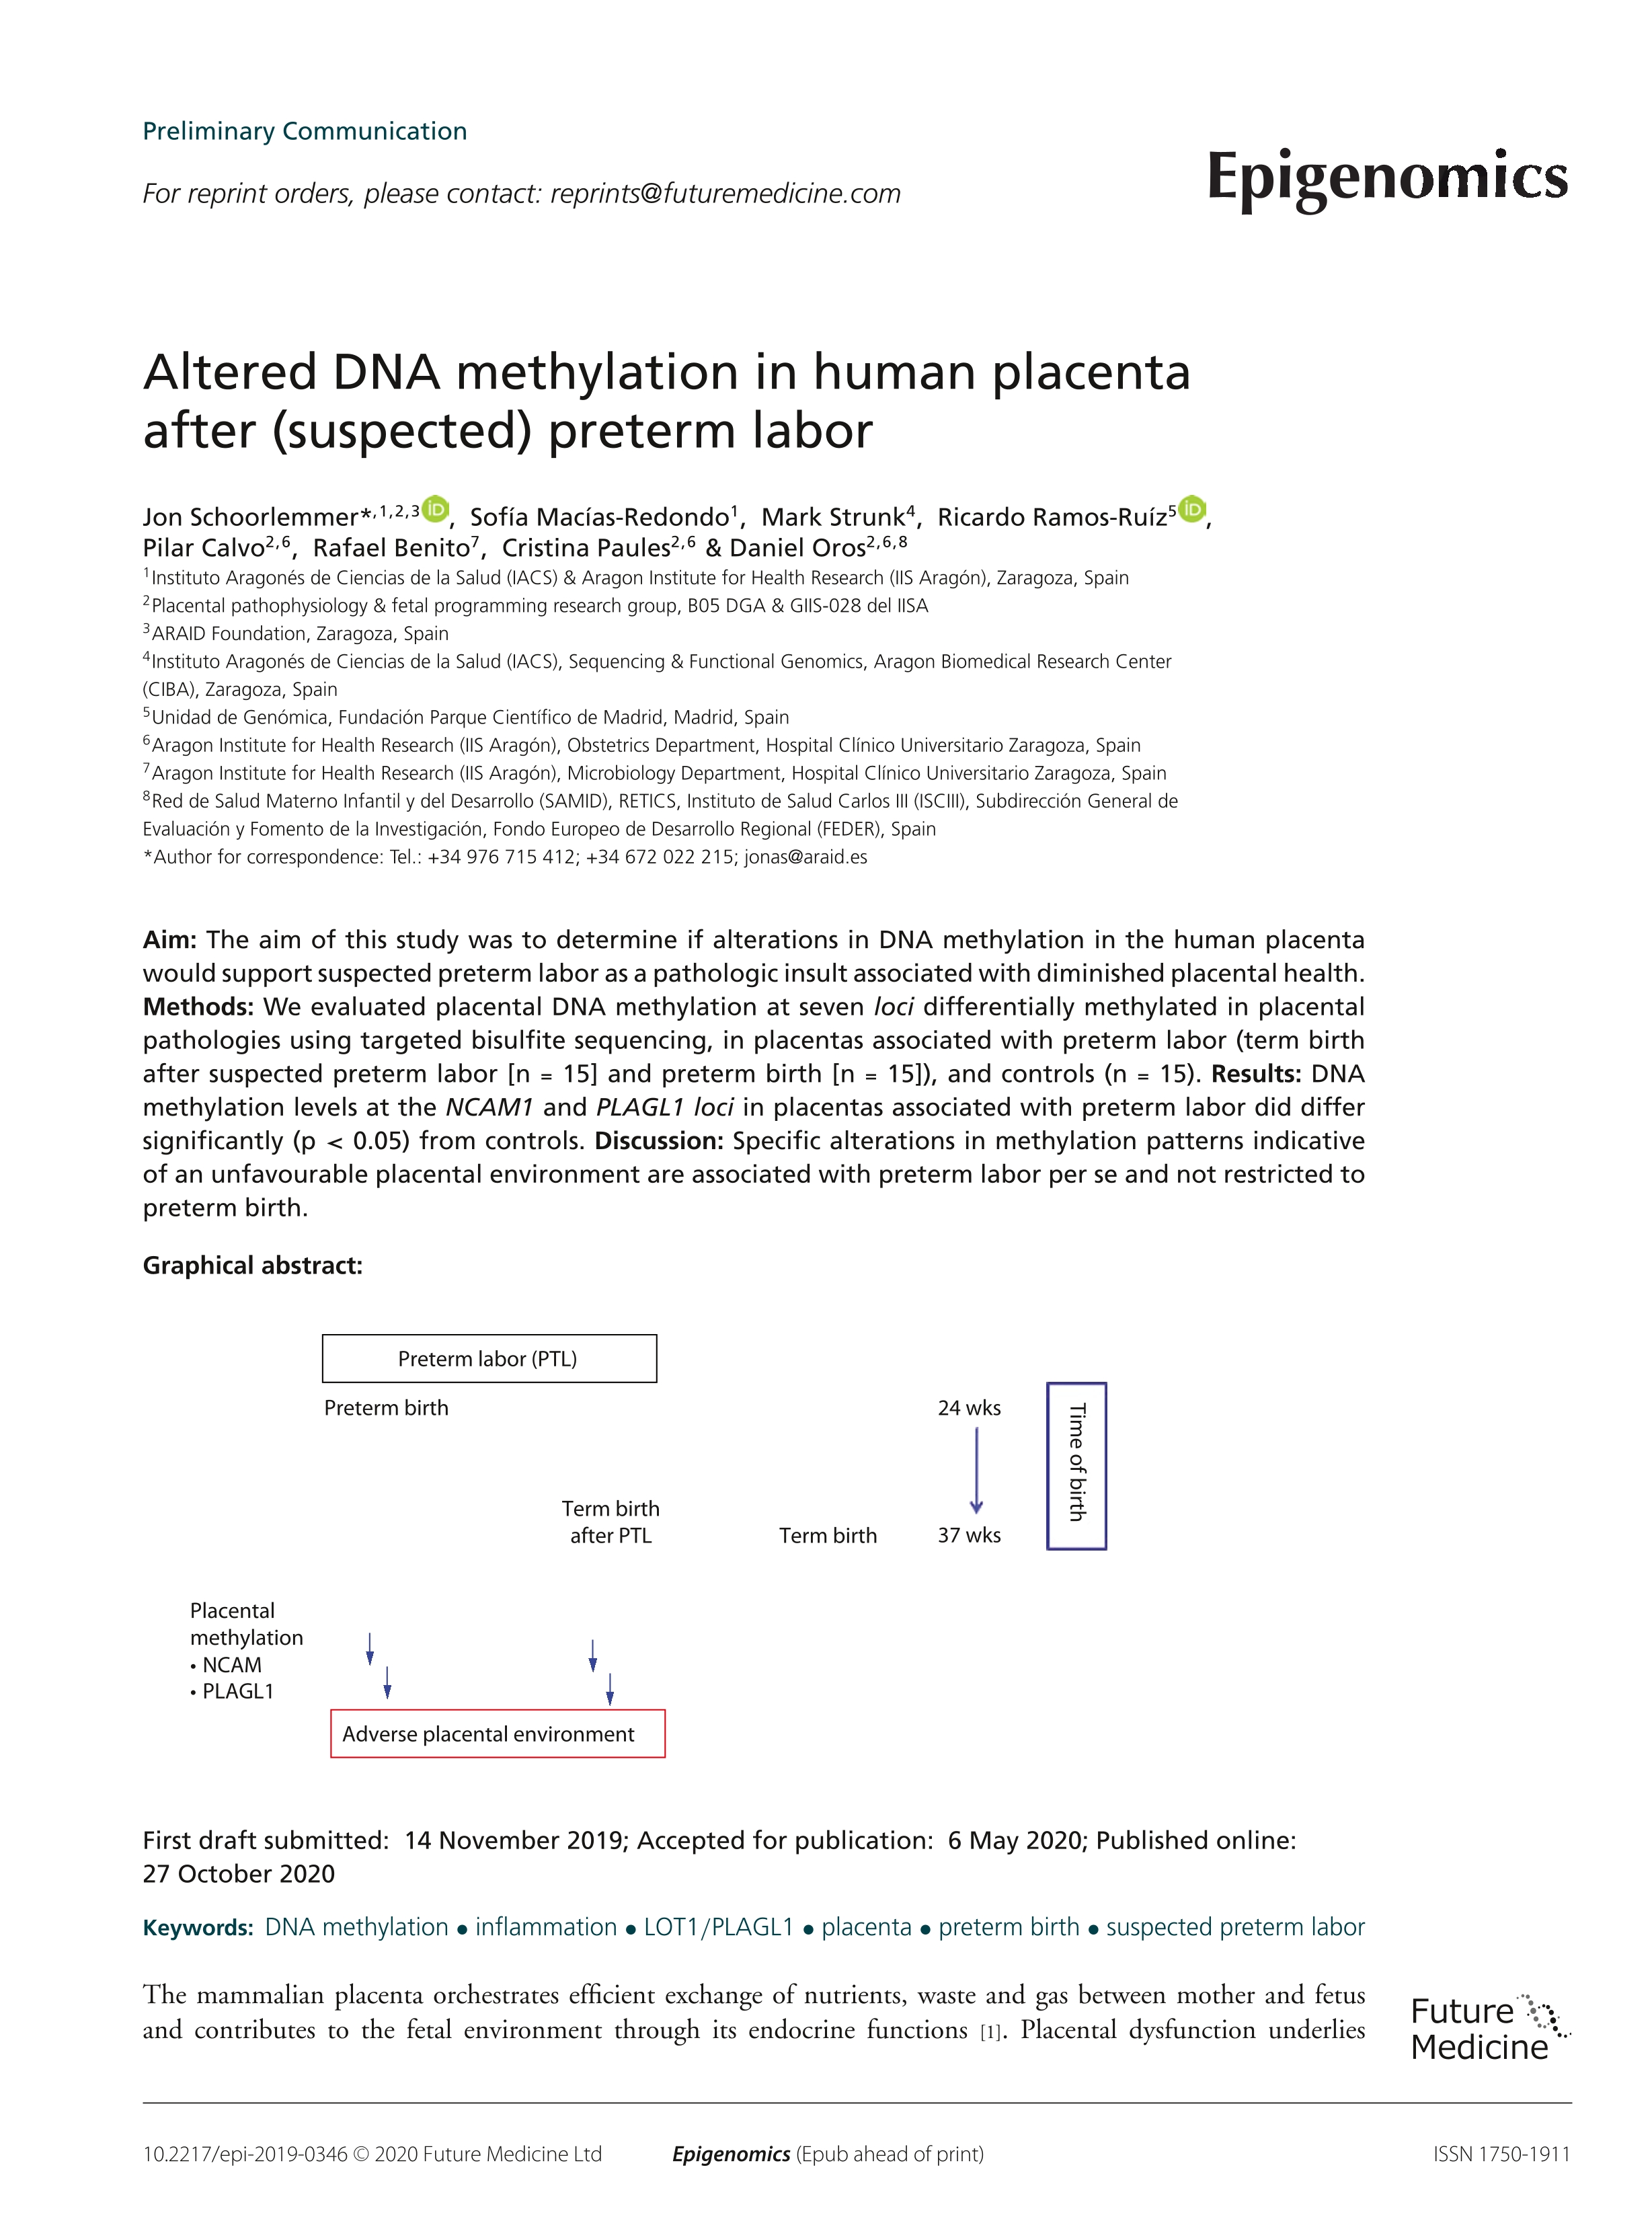 Altered DNA methylation in human placenta after (suspected) preterm labor